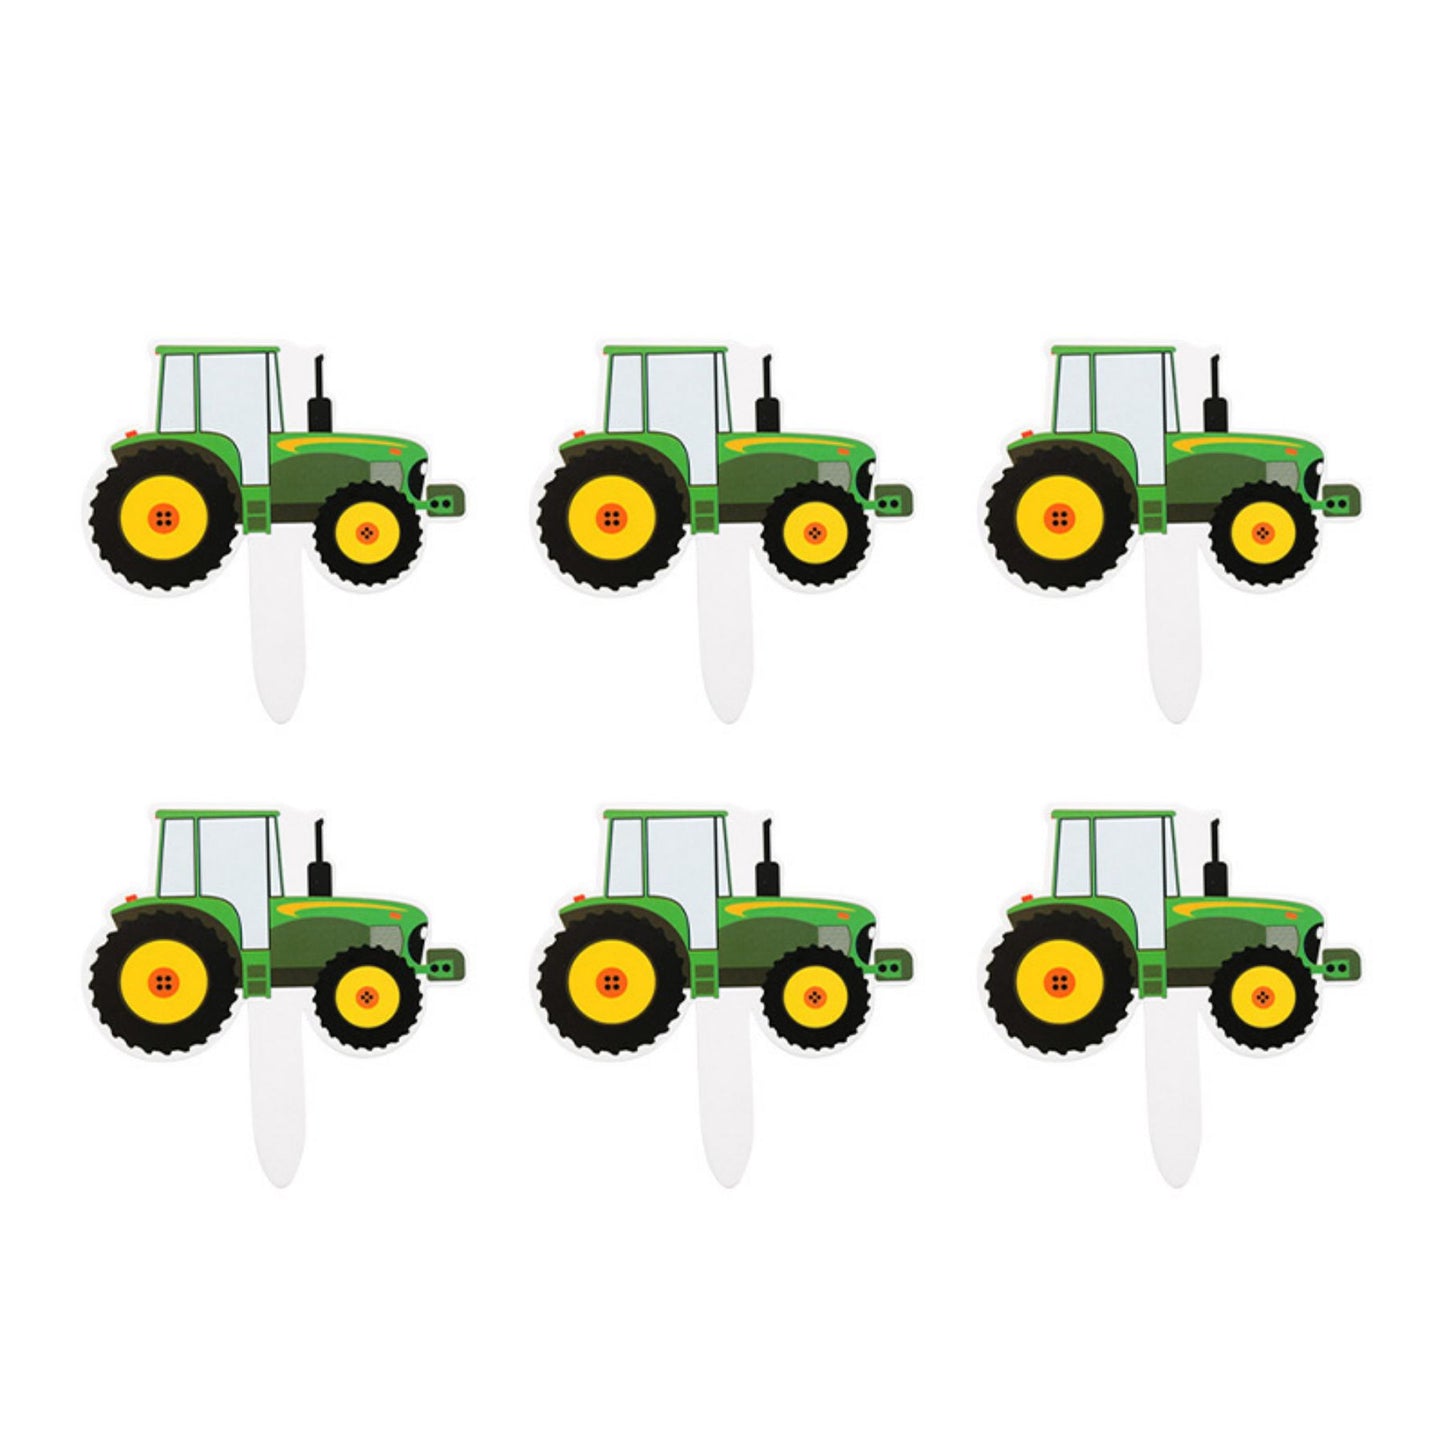 Tractor vehicle farm theme birthday party one year old balloon decoration set